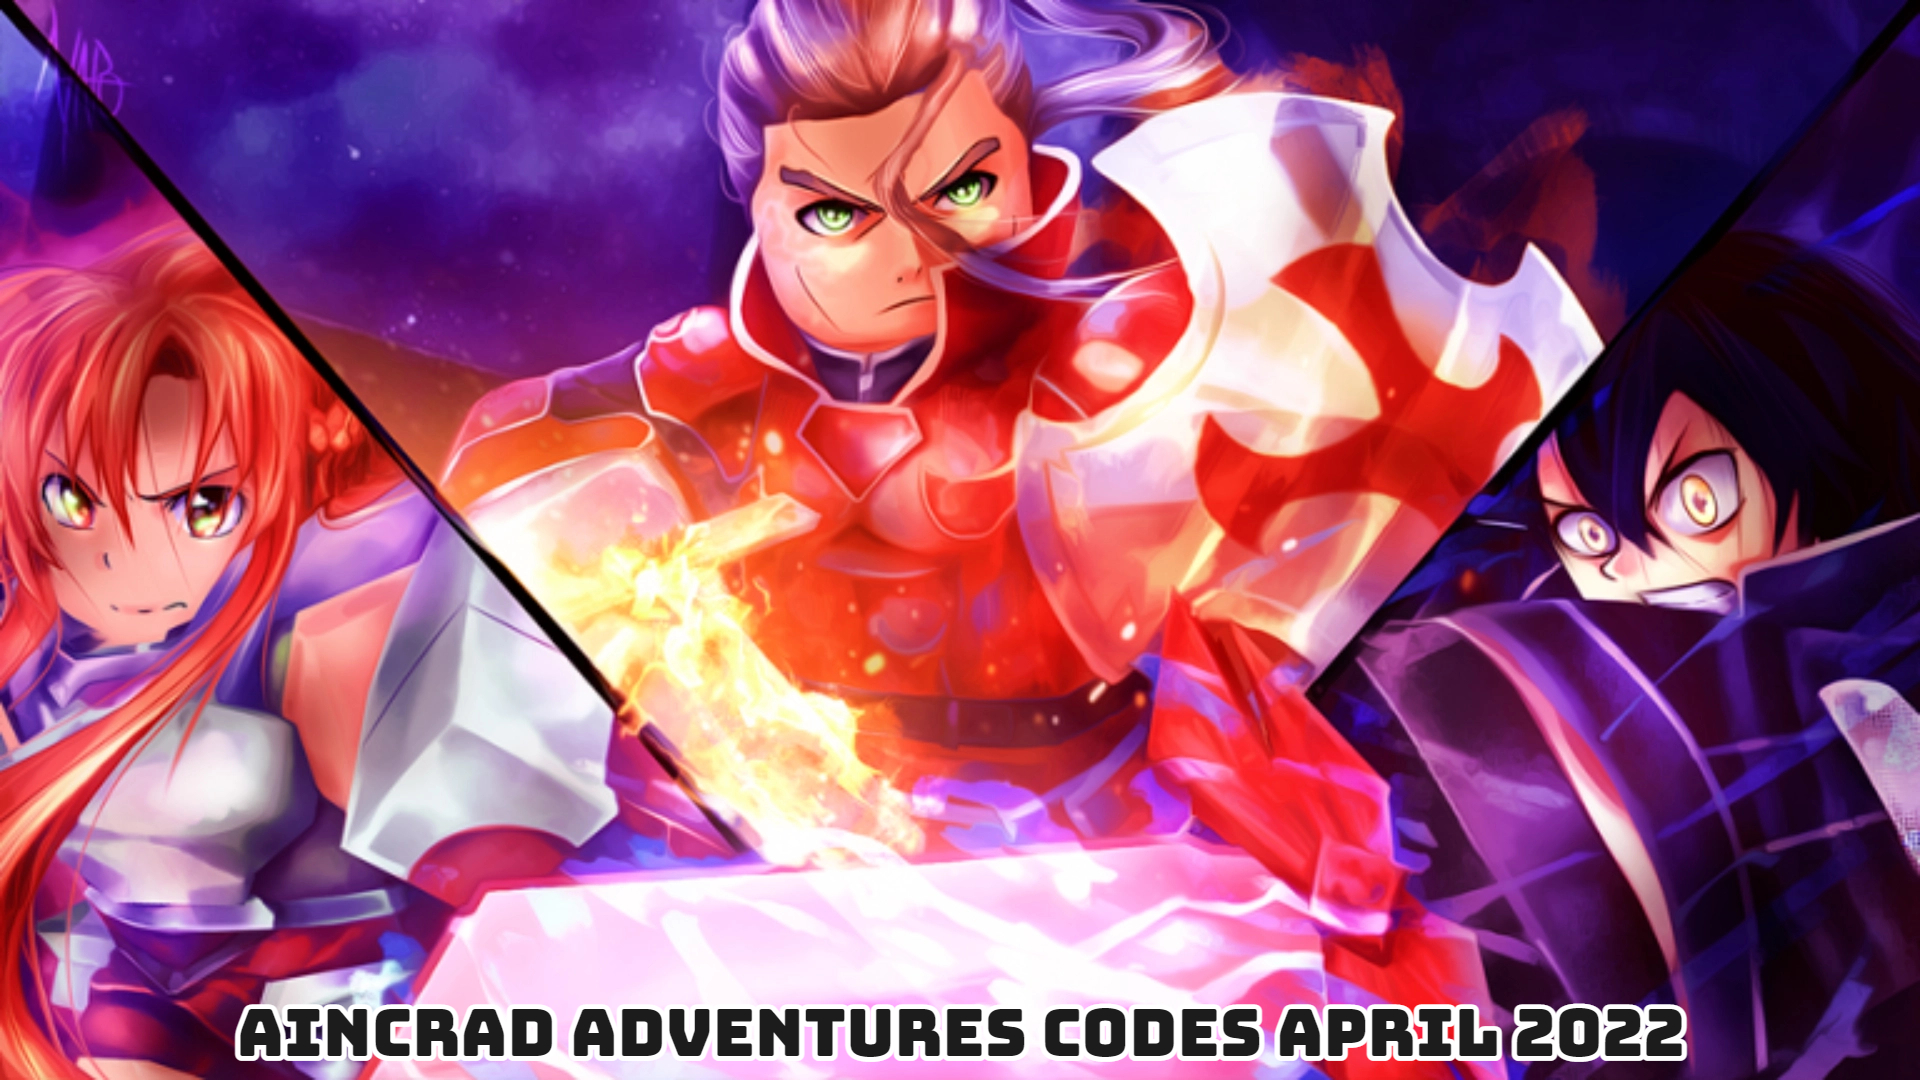 You are currently viewing Aincrad Adventures Codes Today 30 April 2022